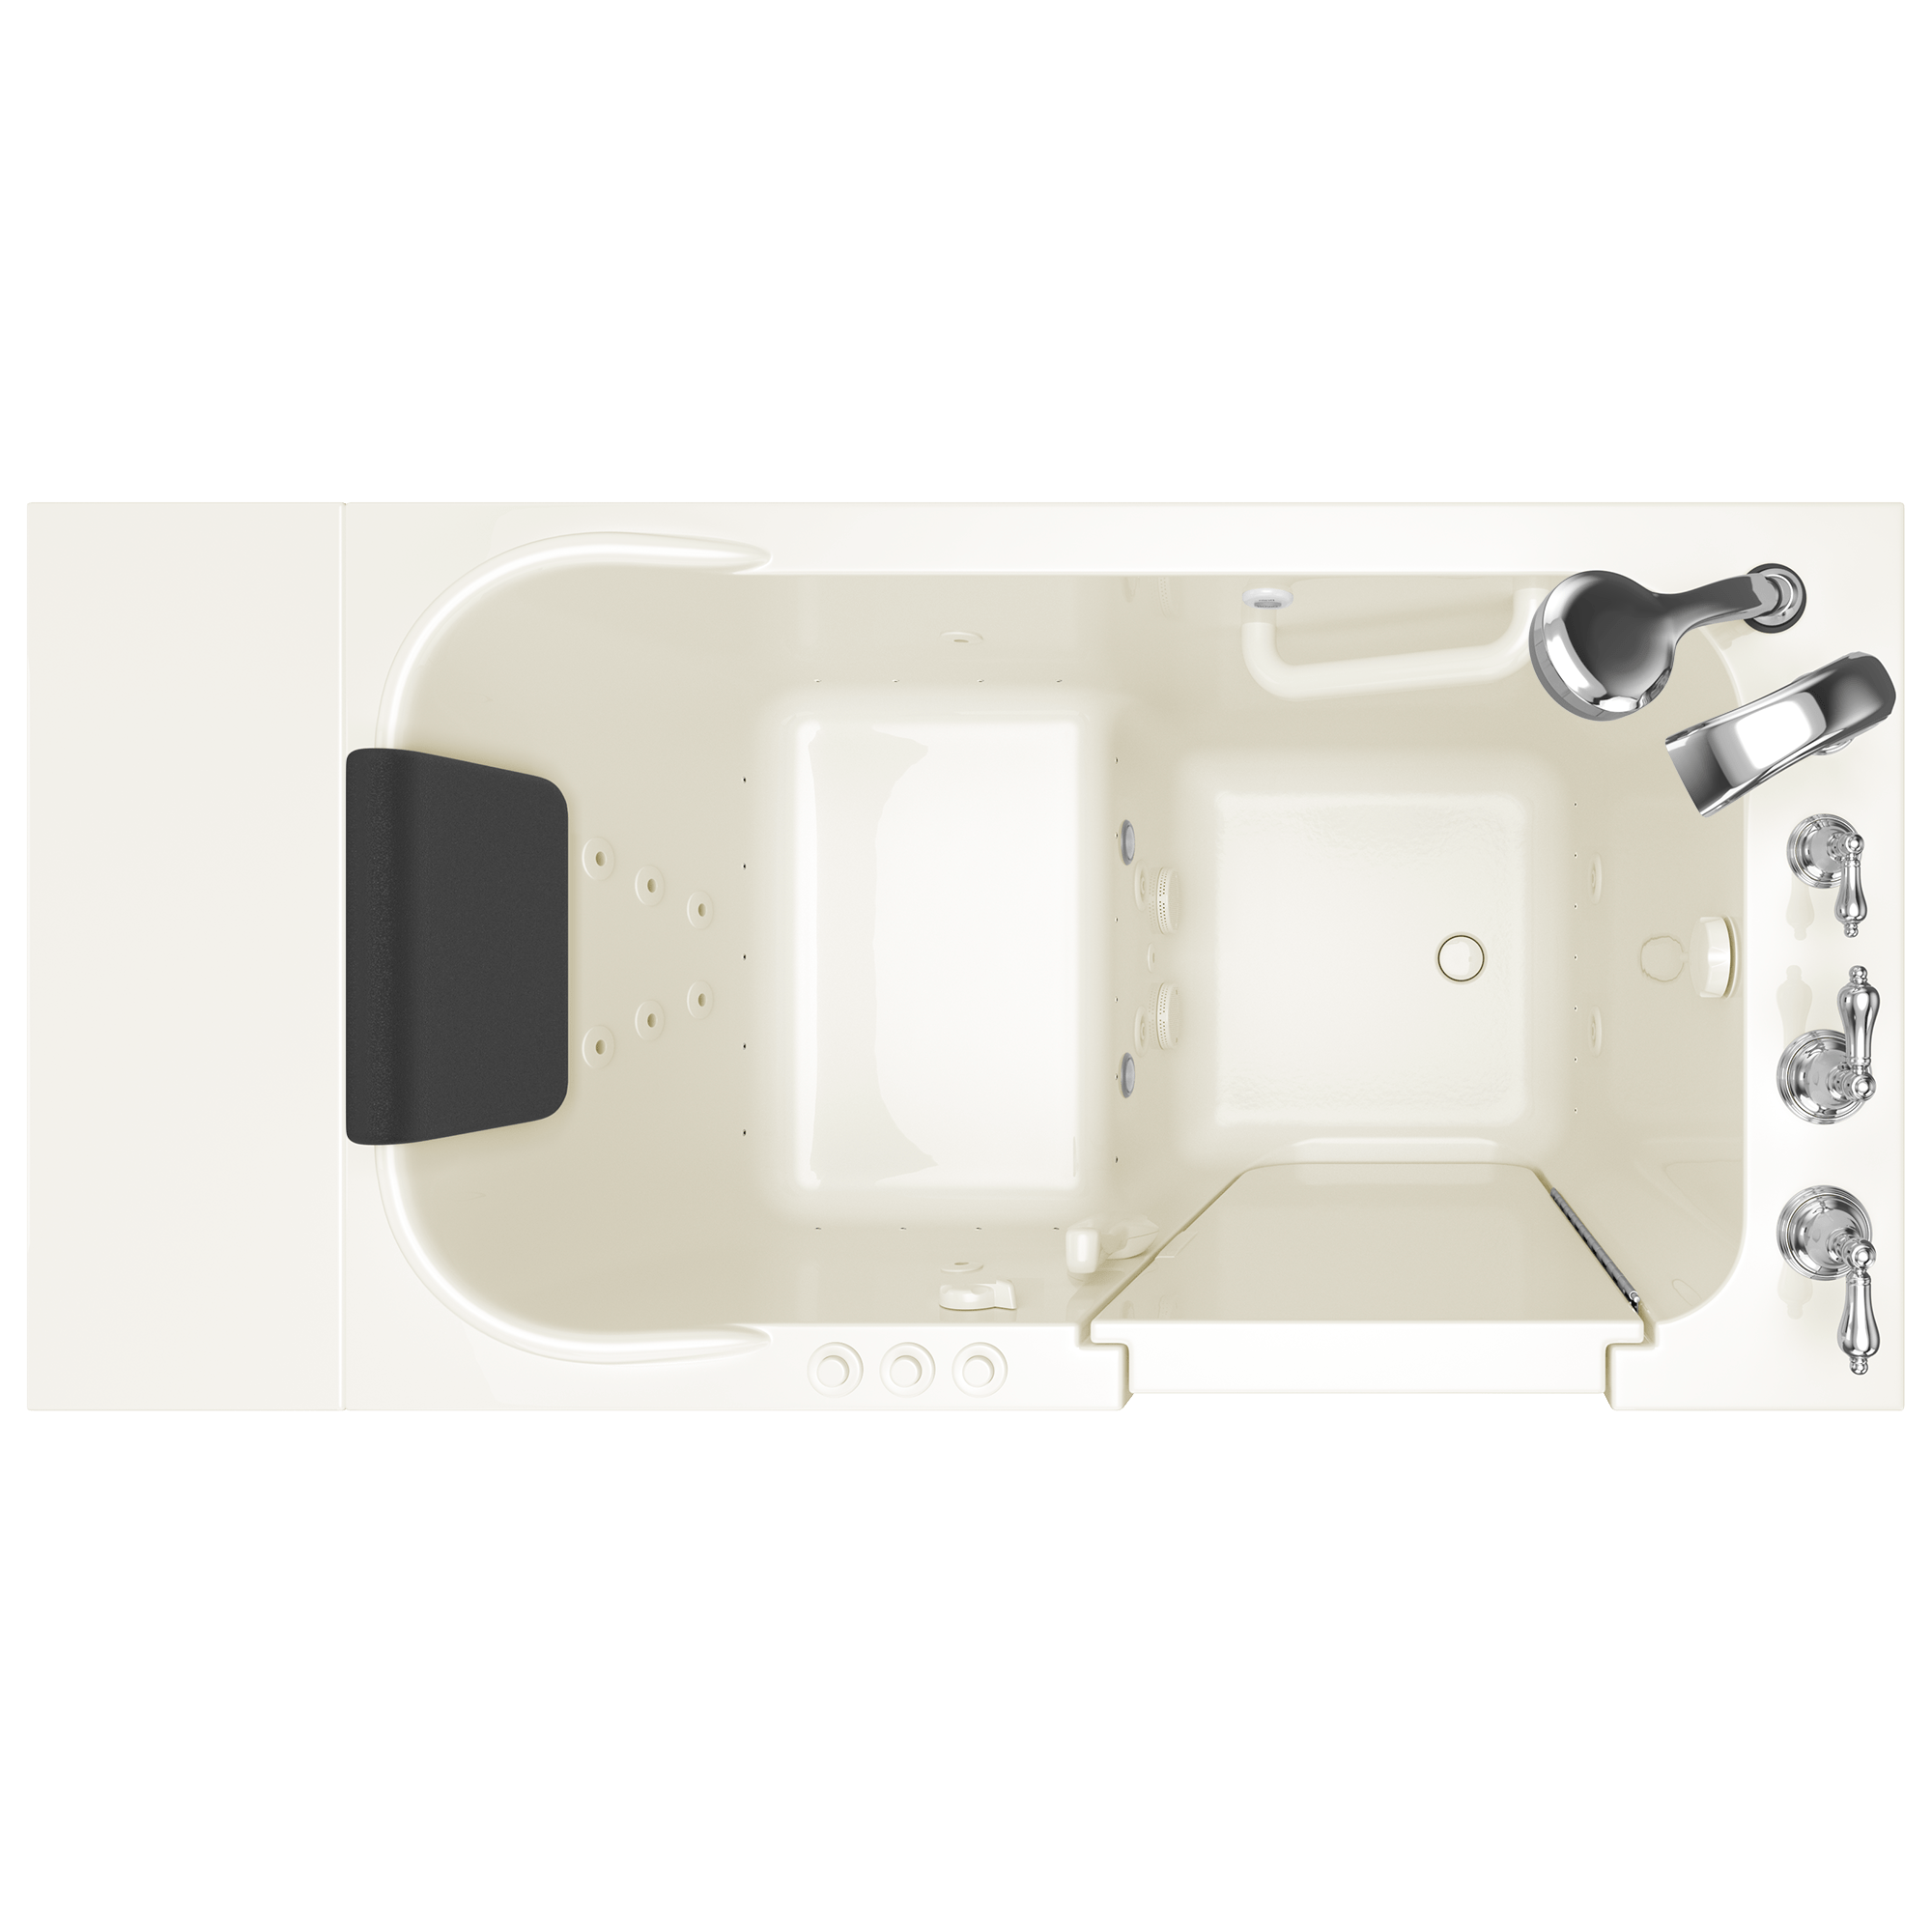 Gelcoat Premium Series 28 x 48 Inch Walk in Tub With Combination Air Spa and Whirlpool Systems   Right Hand Drain With Faucet WIB LINEN